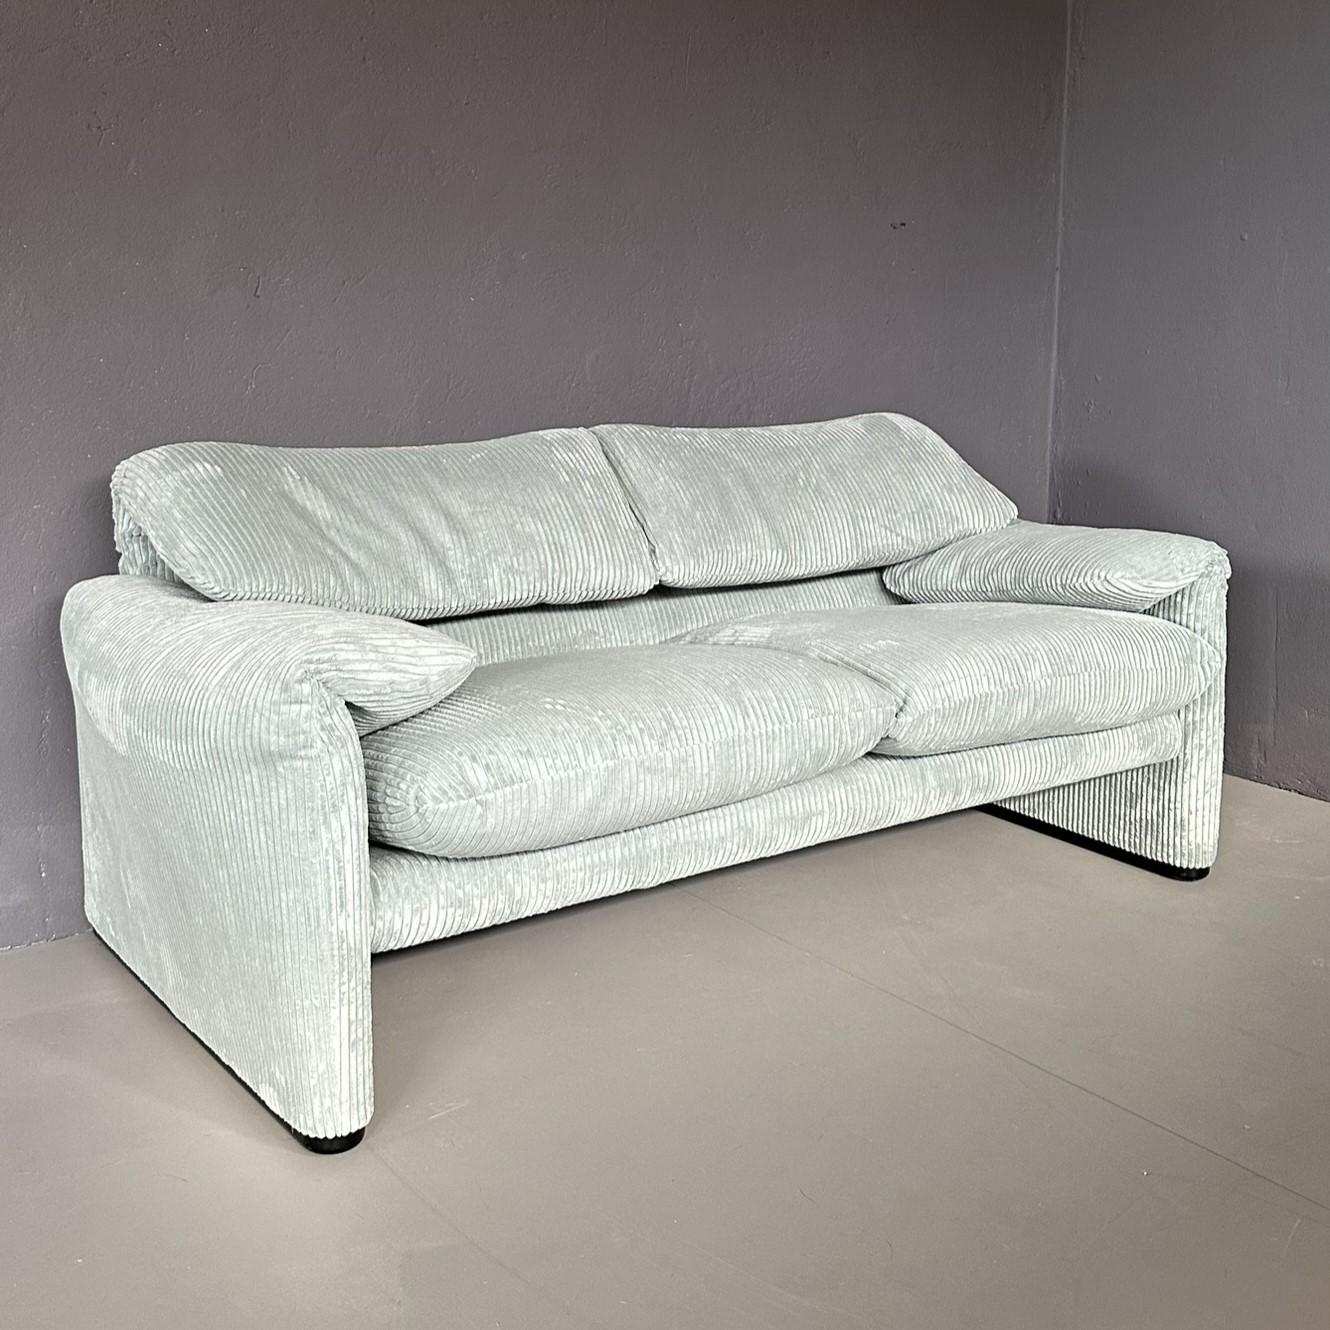 Maralunga two-seater sofa designed by Vico Magistretti for Cassina in the 1970s.
Ribbed light mint green fabric upholstery.
The movement of the backrest and lateral armrests is functional.
Very good condition